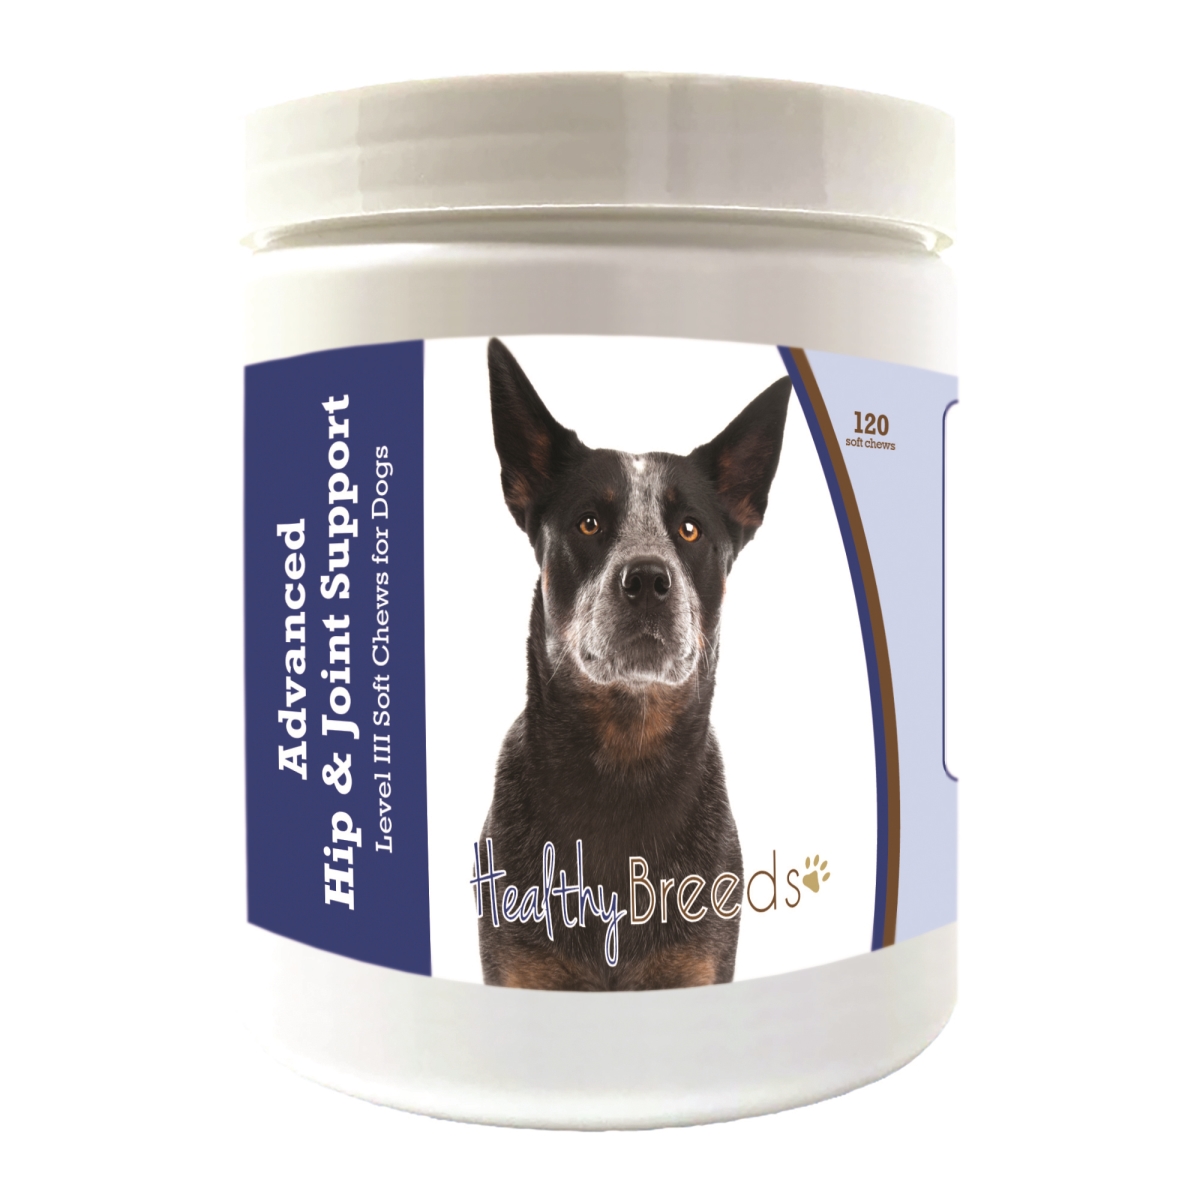 Picture of Healthy Breeds 192959897470 Australian Cattle Dog Advanced Hip & Joint Support Level III Soft Chews for Dogs